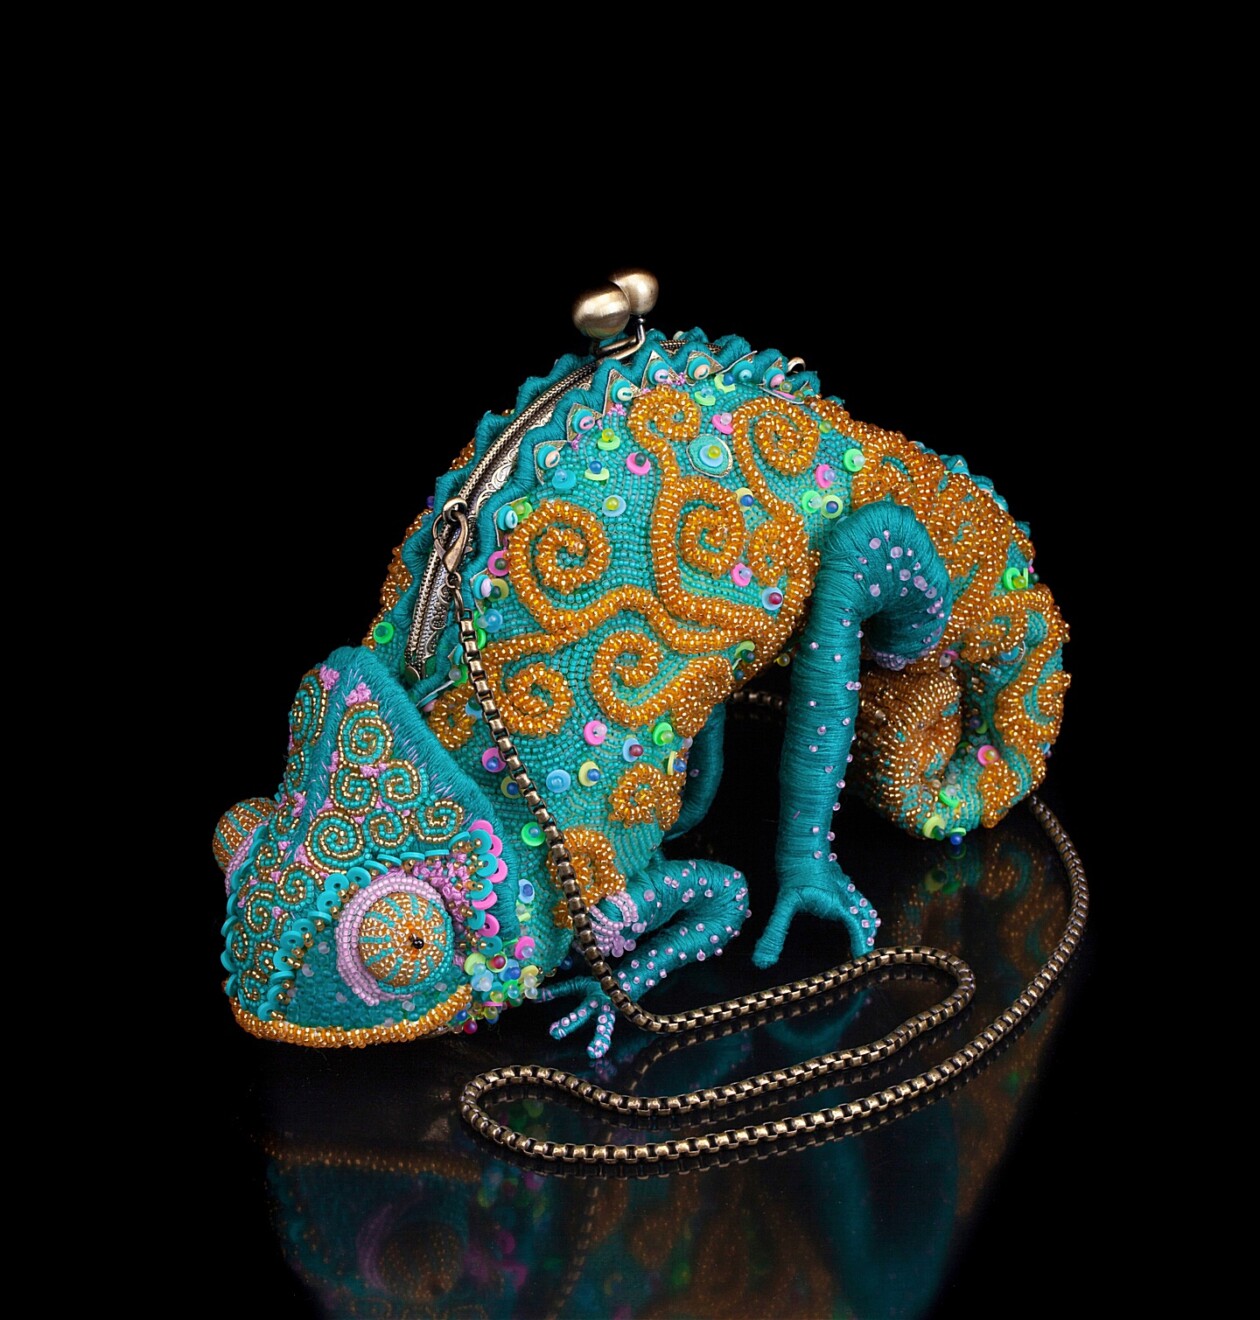 Intricate And Whimsical Hand Embroidered Felted Bags By Alena Kova (28)